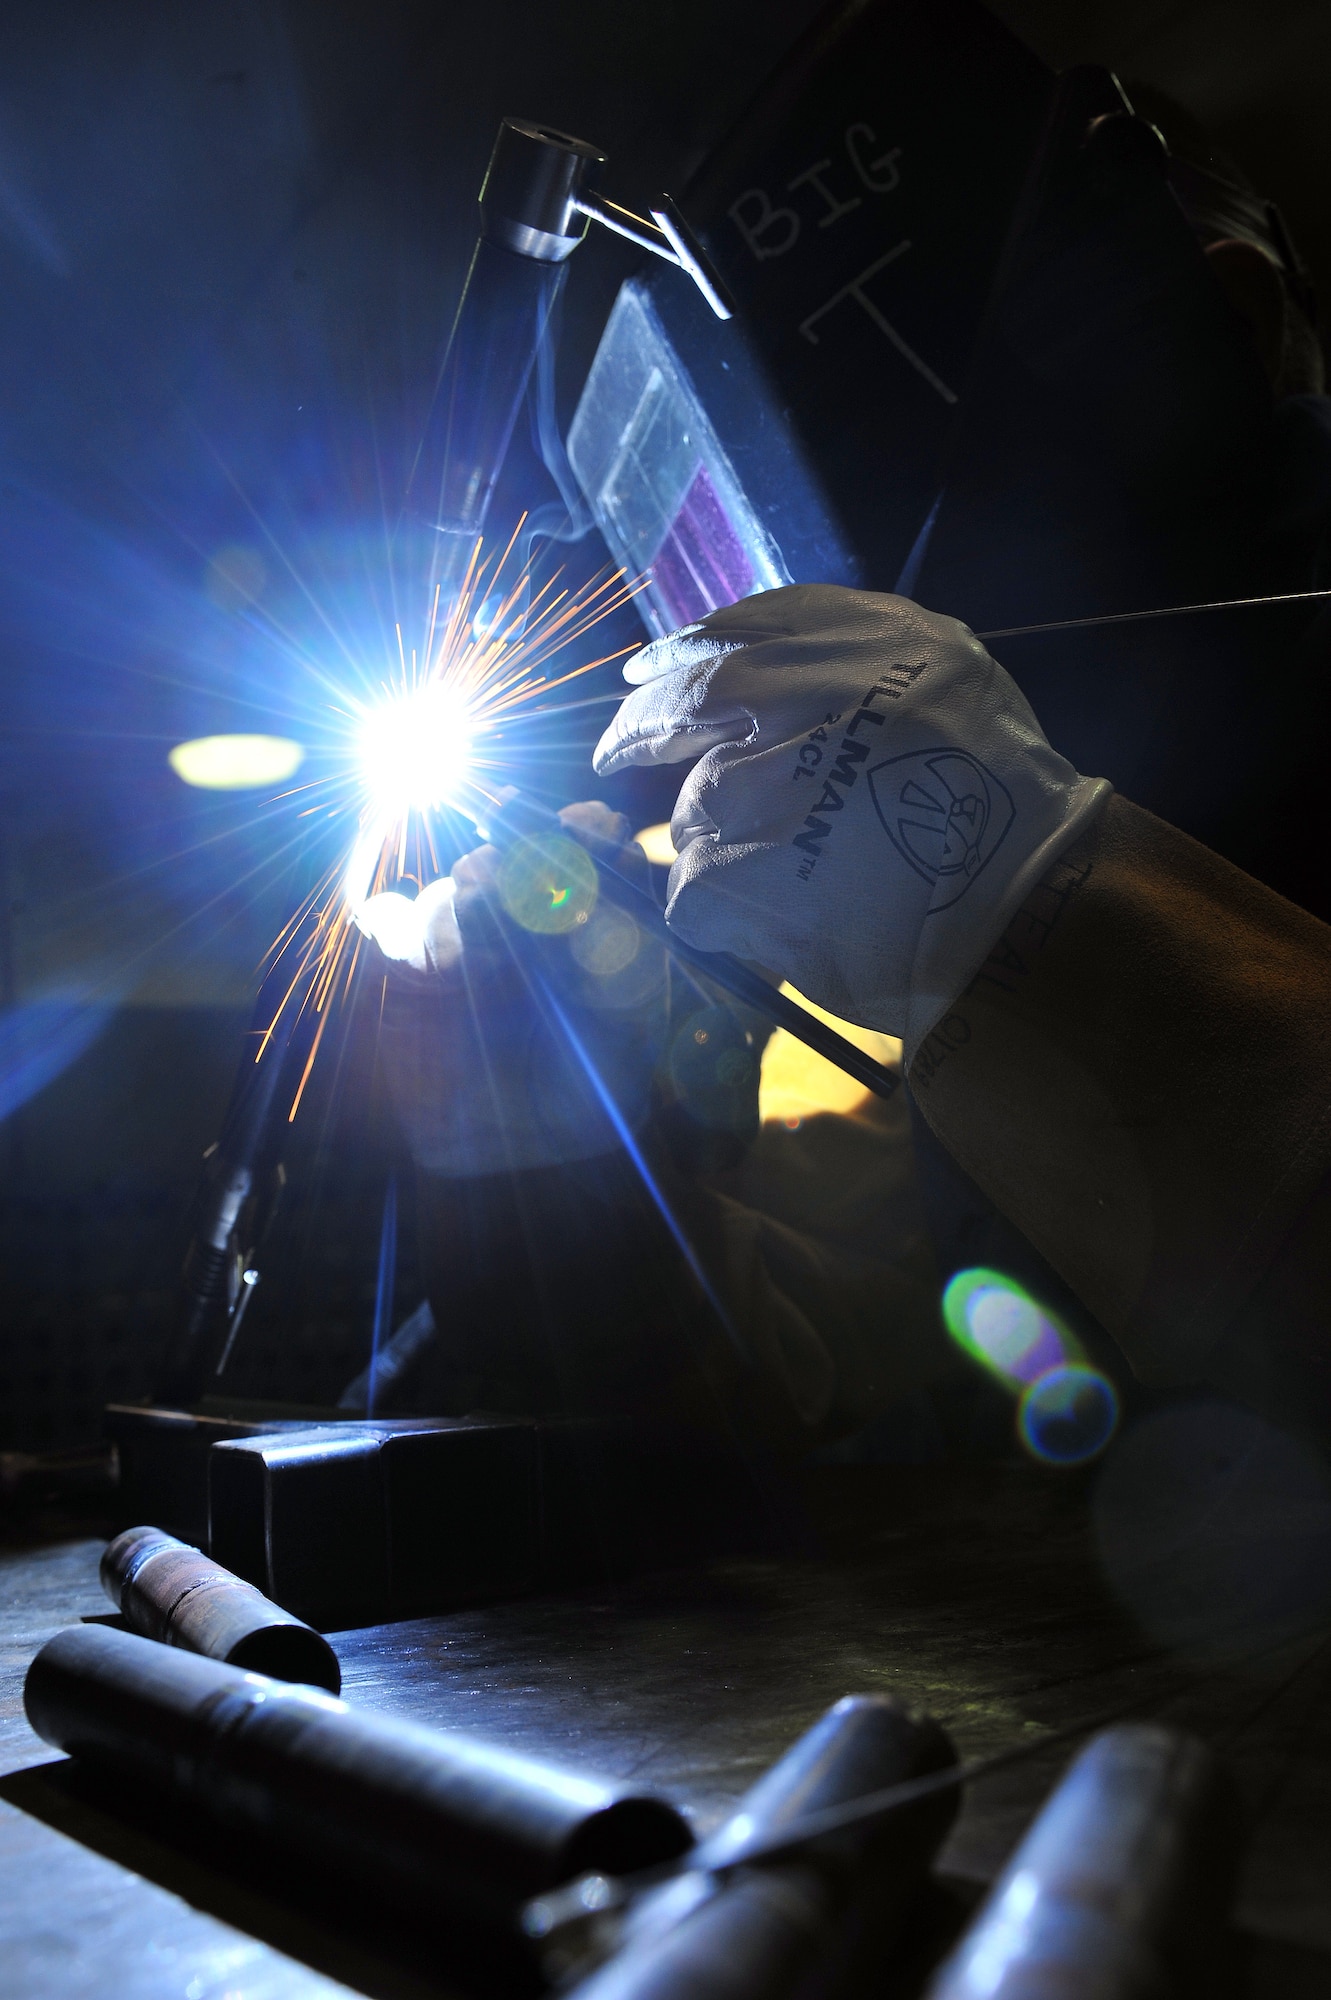 U.S. Air Force Airman 1st Class Donovan Timek, 355th Equipment Maintenance Squadron aircraft metals technology journeyman, is tungsten inert gas arc welding in the G6 position on Davis-Monthan Air Force Base, Ariz., Nov 27, 2012.  Airman Timek is practicing this technique to be weld certified in Air Force Metals Tech Standards. (U.S. Air Force Photo by Airman 1st Class Josh Slavin/Released)